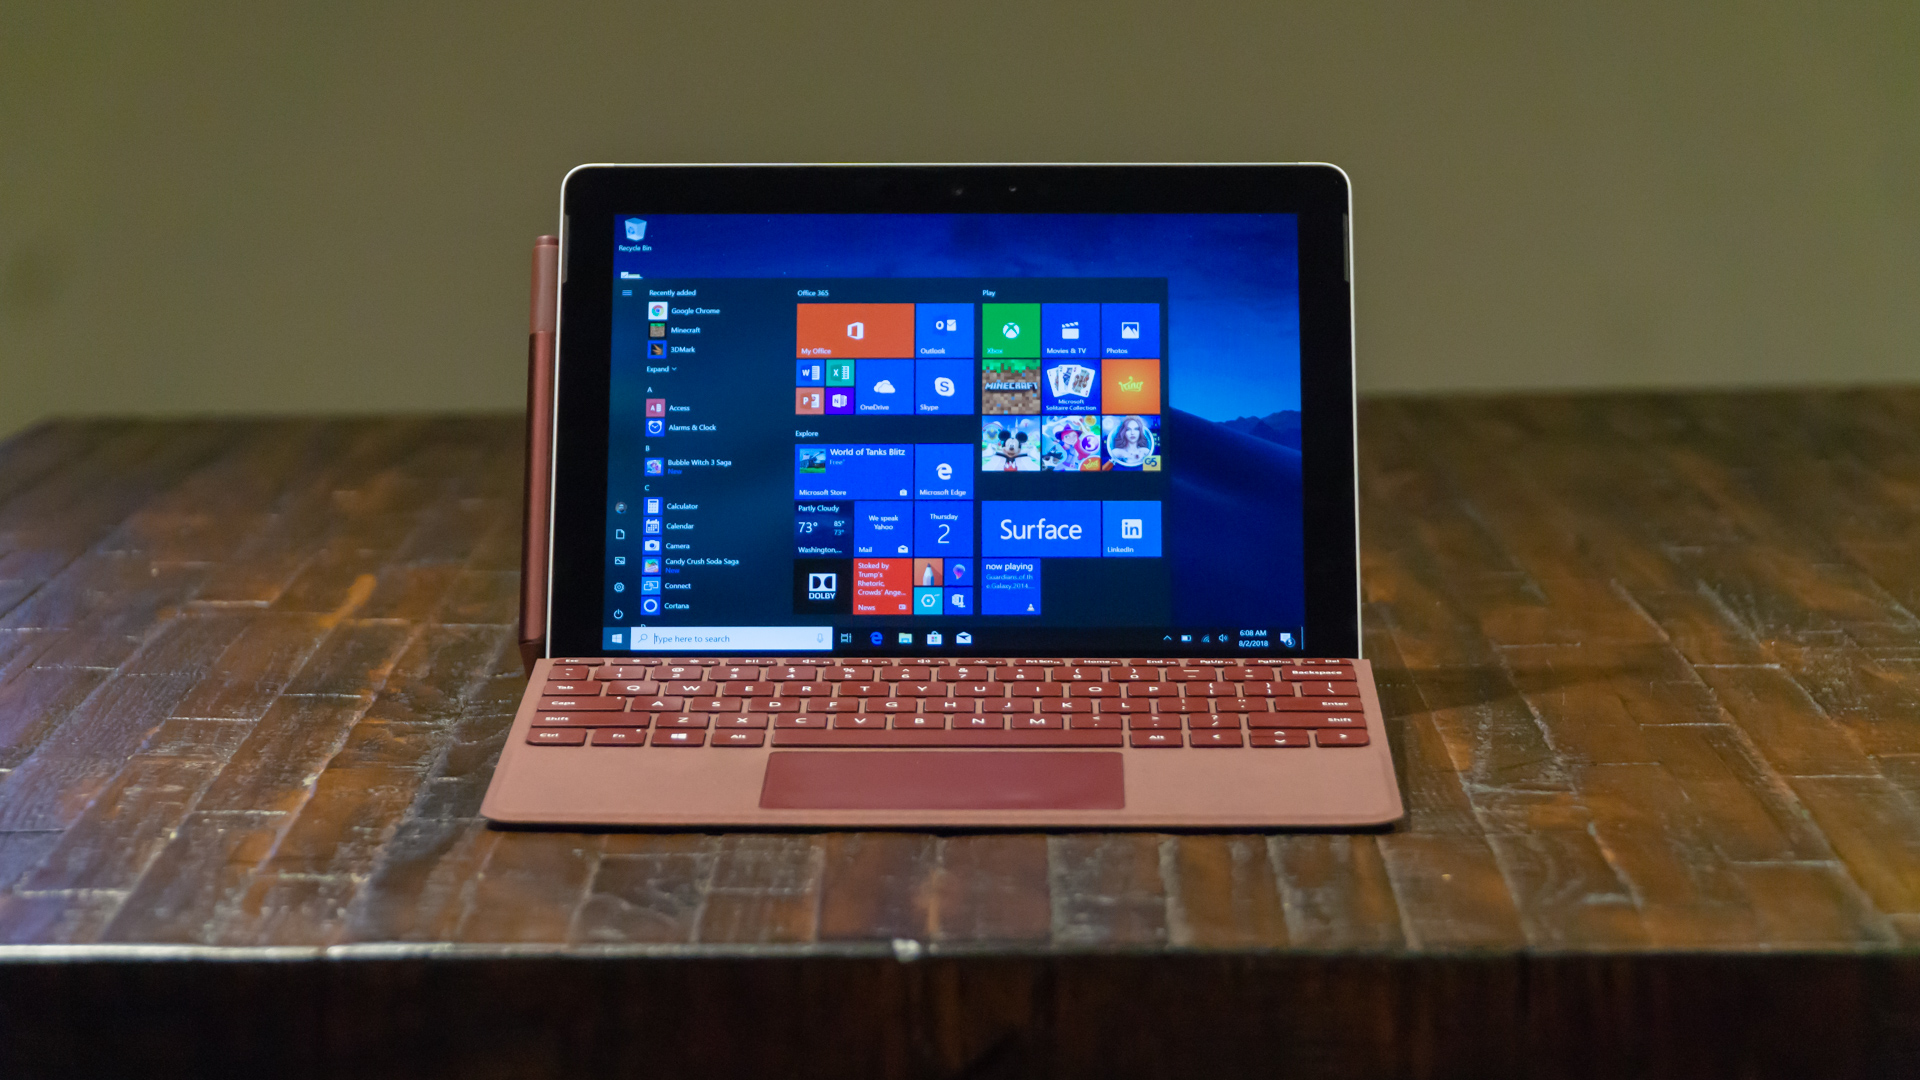 Performance, battery life, features and verdict - Microsoft